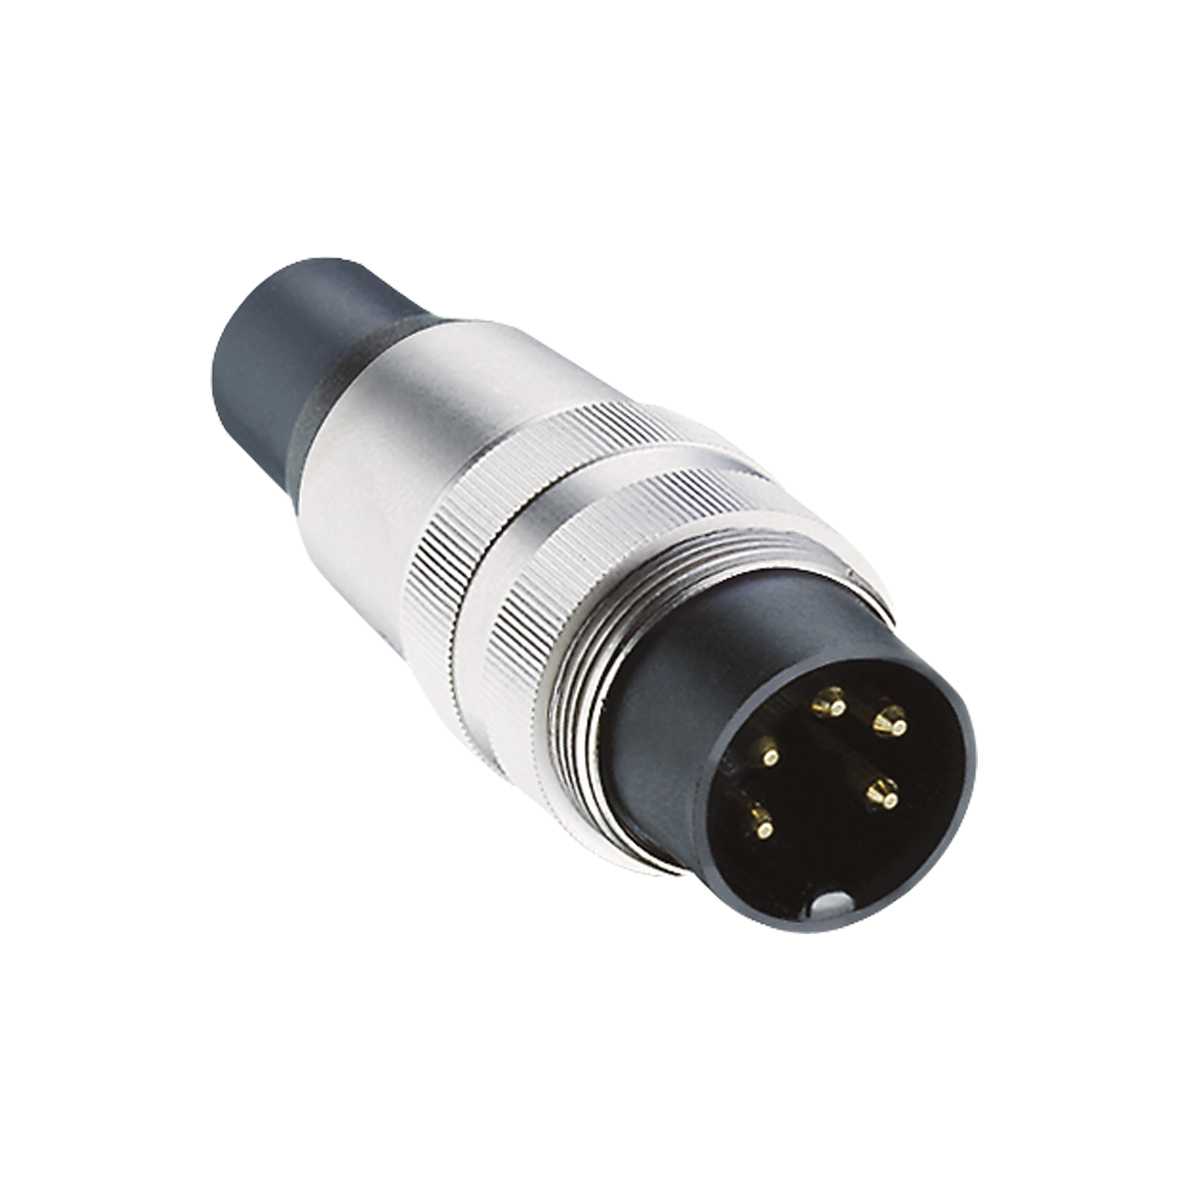 Lumberg: SV ...-8 (Series 03 | Circular connectors with threaded joint M16 acc. to IEC 61076-2-106, IP40/IP68)